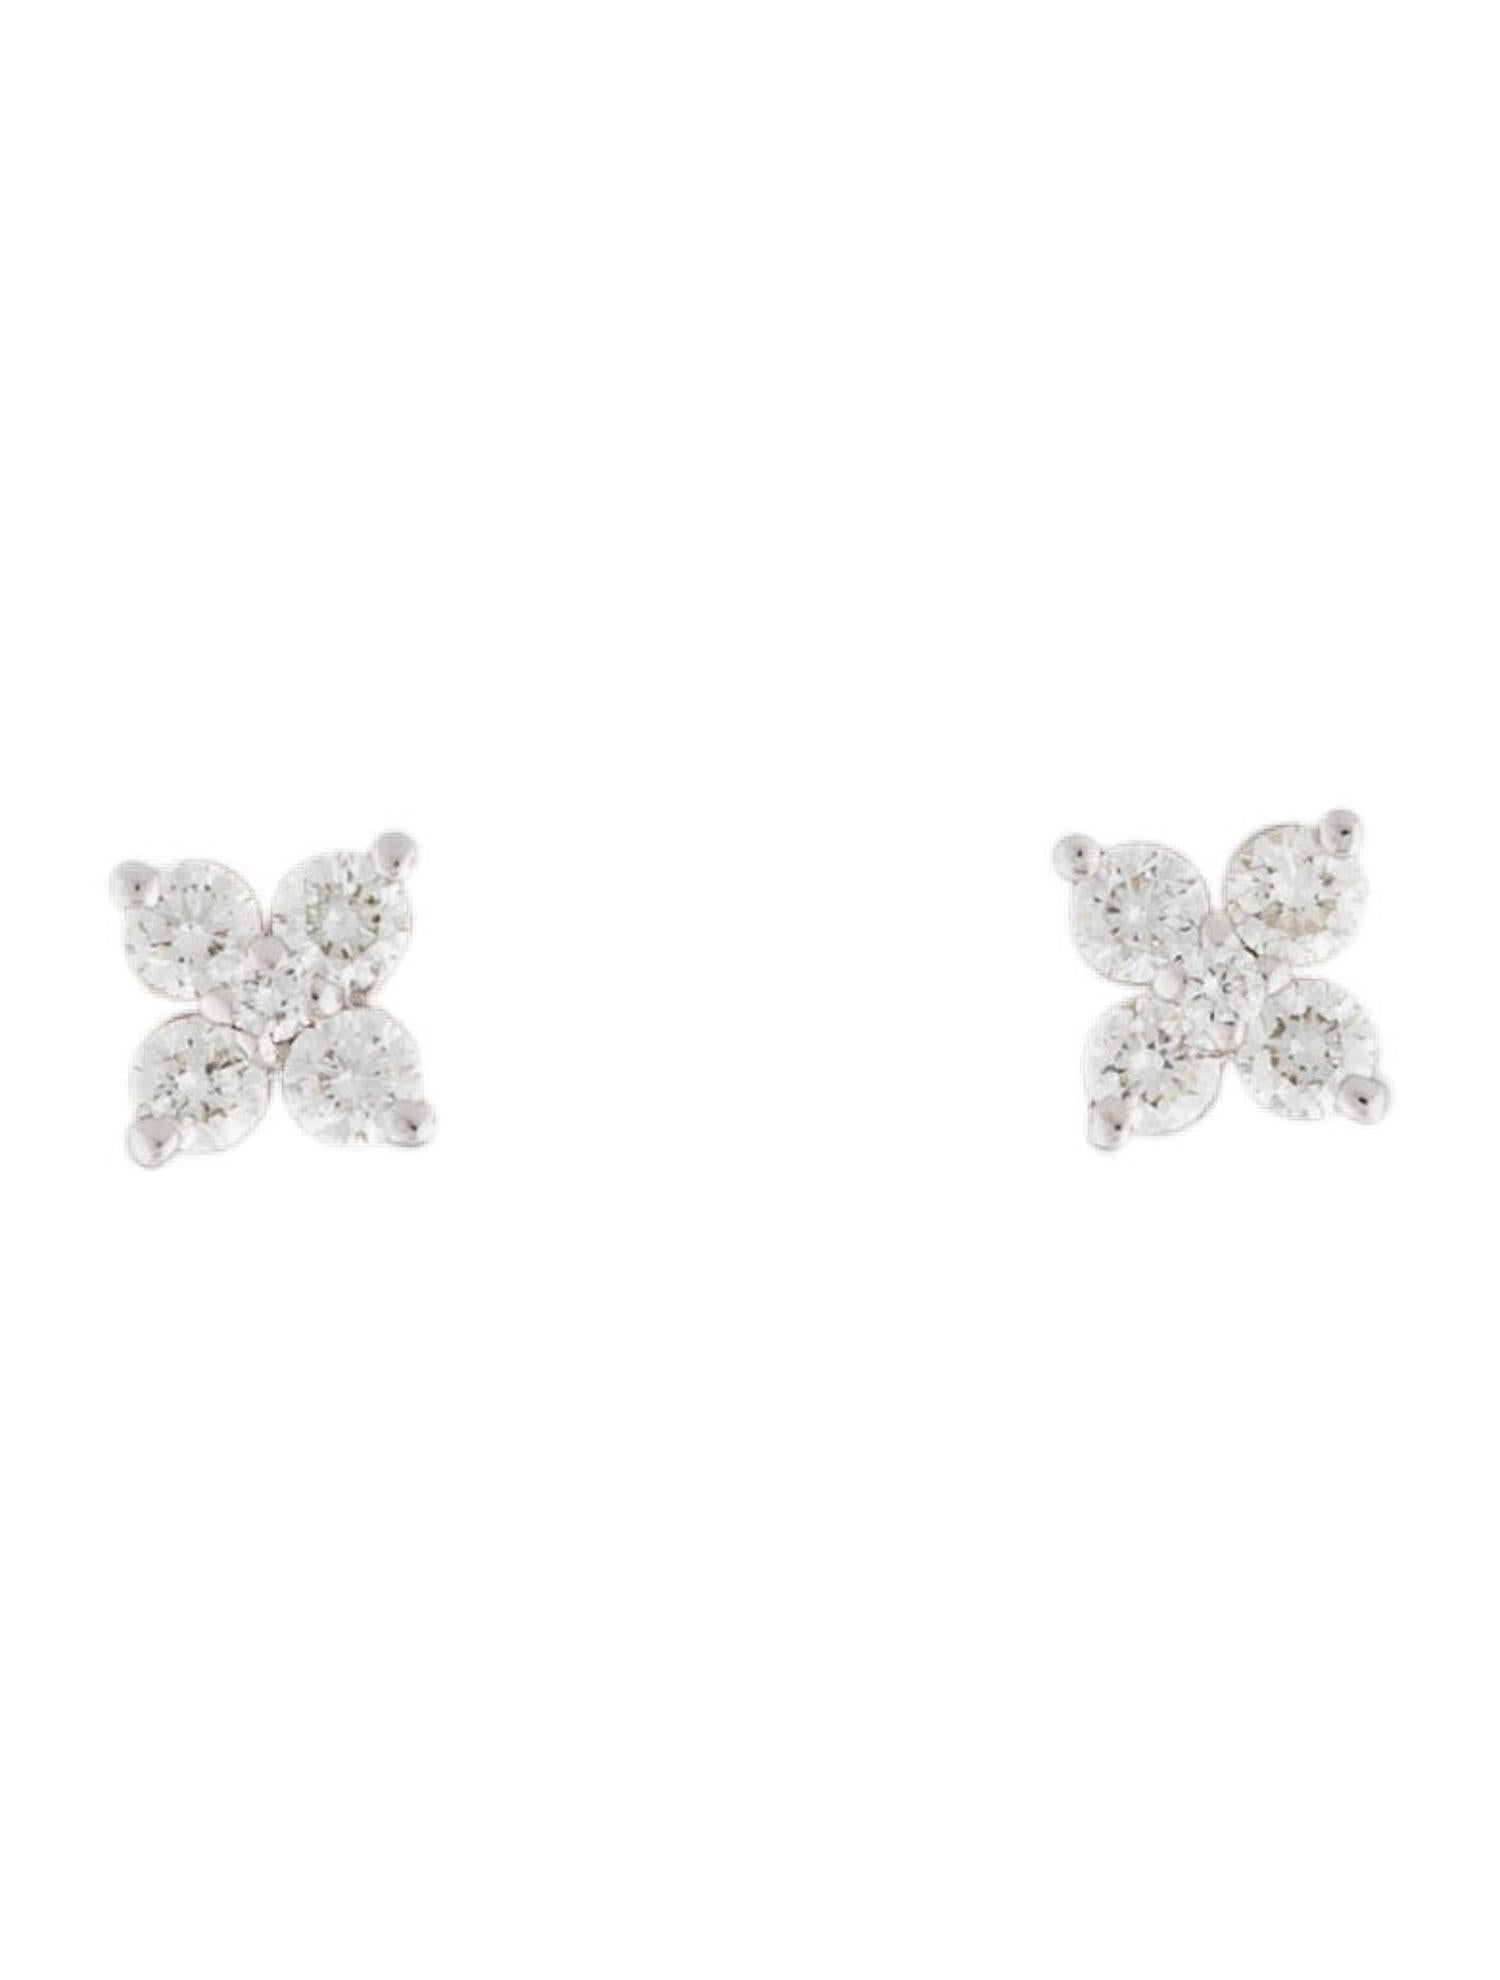 Quality Earrings Set: Made from real 14k gold and 10 round diamonds on each earring approximately 0.32 ct; Diamond Color & Clarity is GH-SI Certified diamonds with a butterfly push-backs for closure
 Surprise Your Loved Ones with Our Cluster Diamond